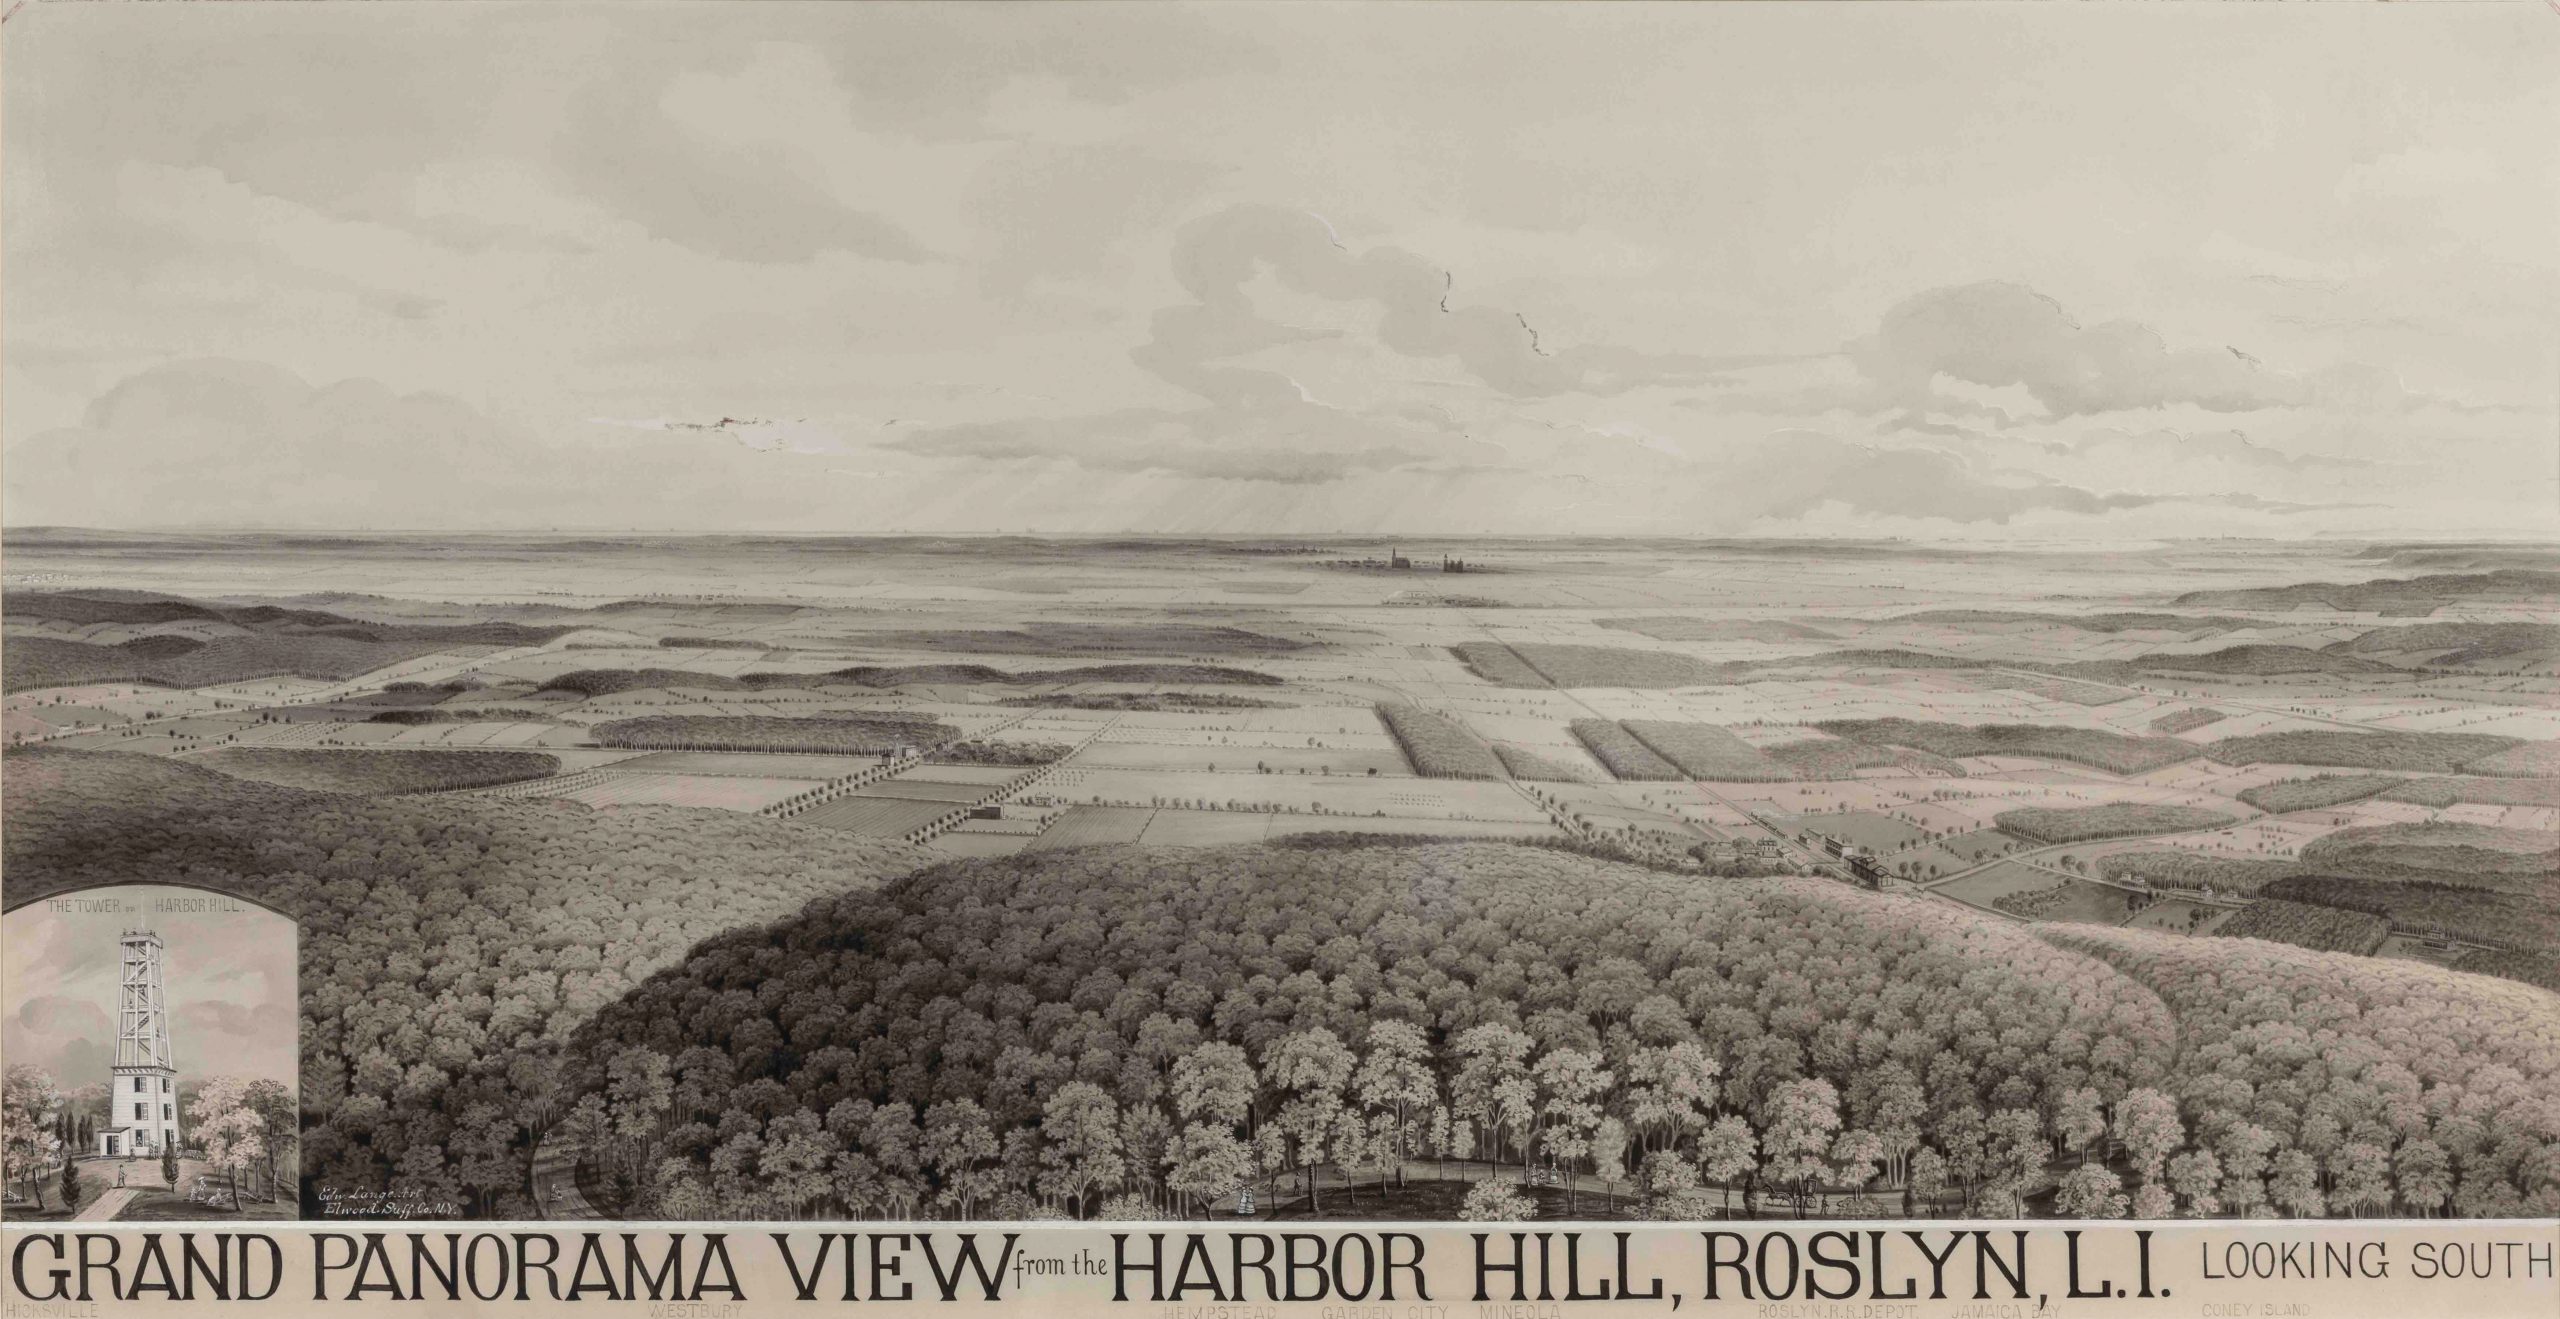 Grand-Panorama-View-from-the-Harbor-HIll-Roslyn-L.I.-Looking-South-Preservation-Long-Island-1996.3.2_cropped-scaled.jpg